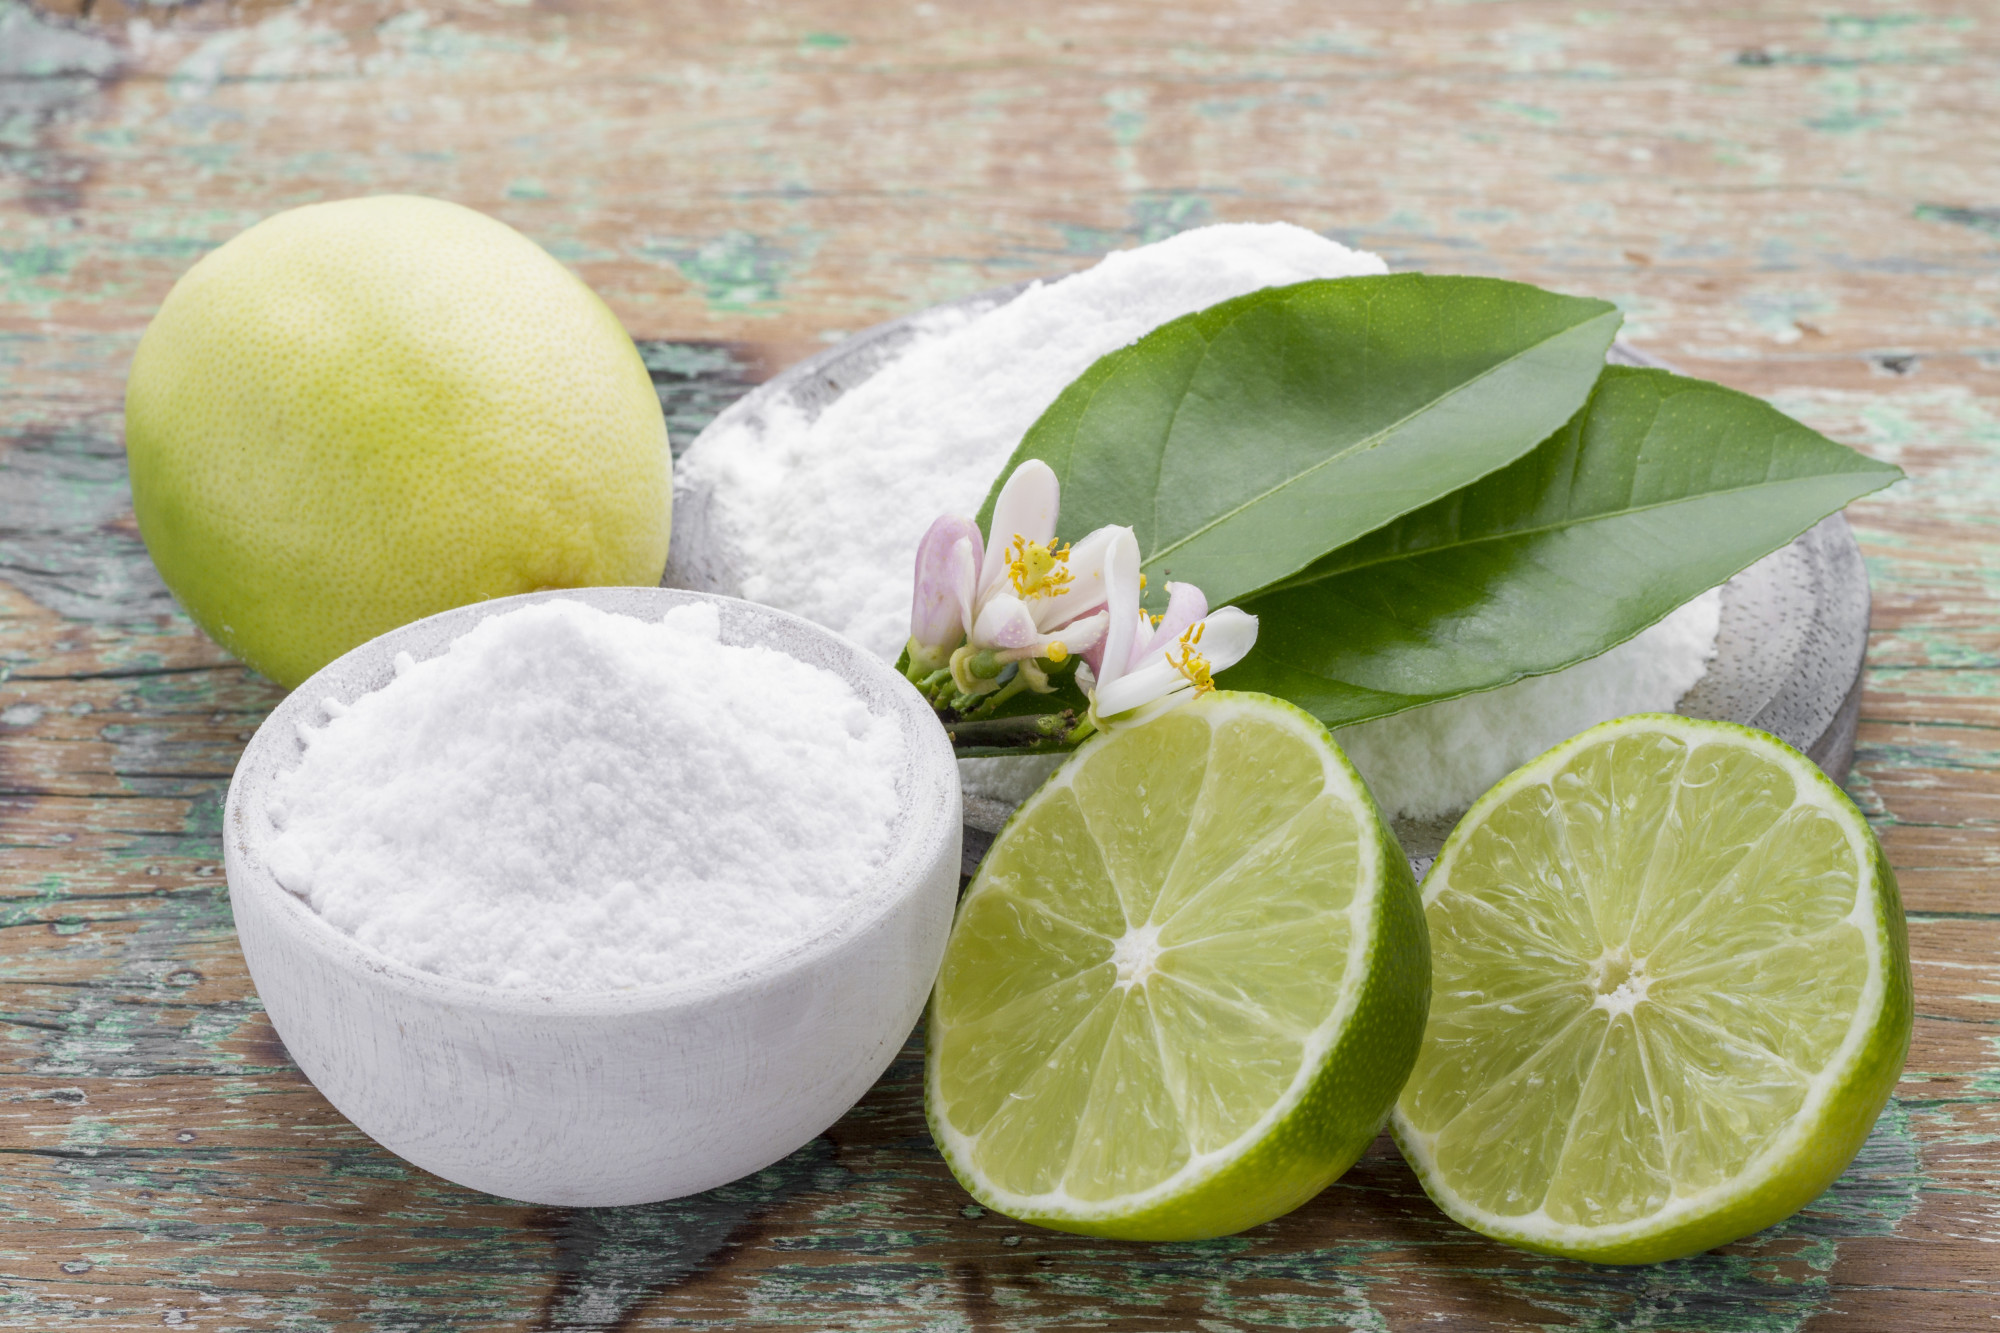 Make Your Own Citric Acid Cleaner in 5 Simple Steps